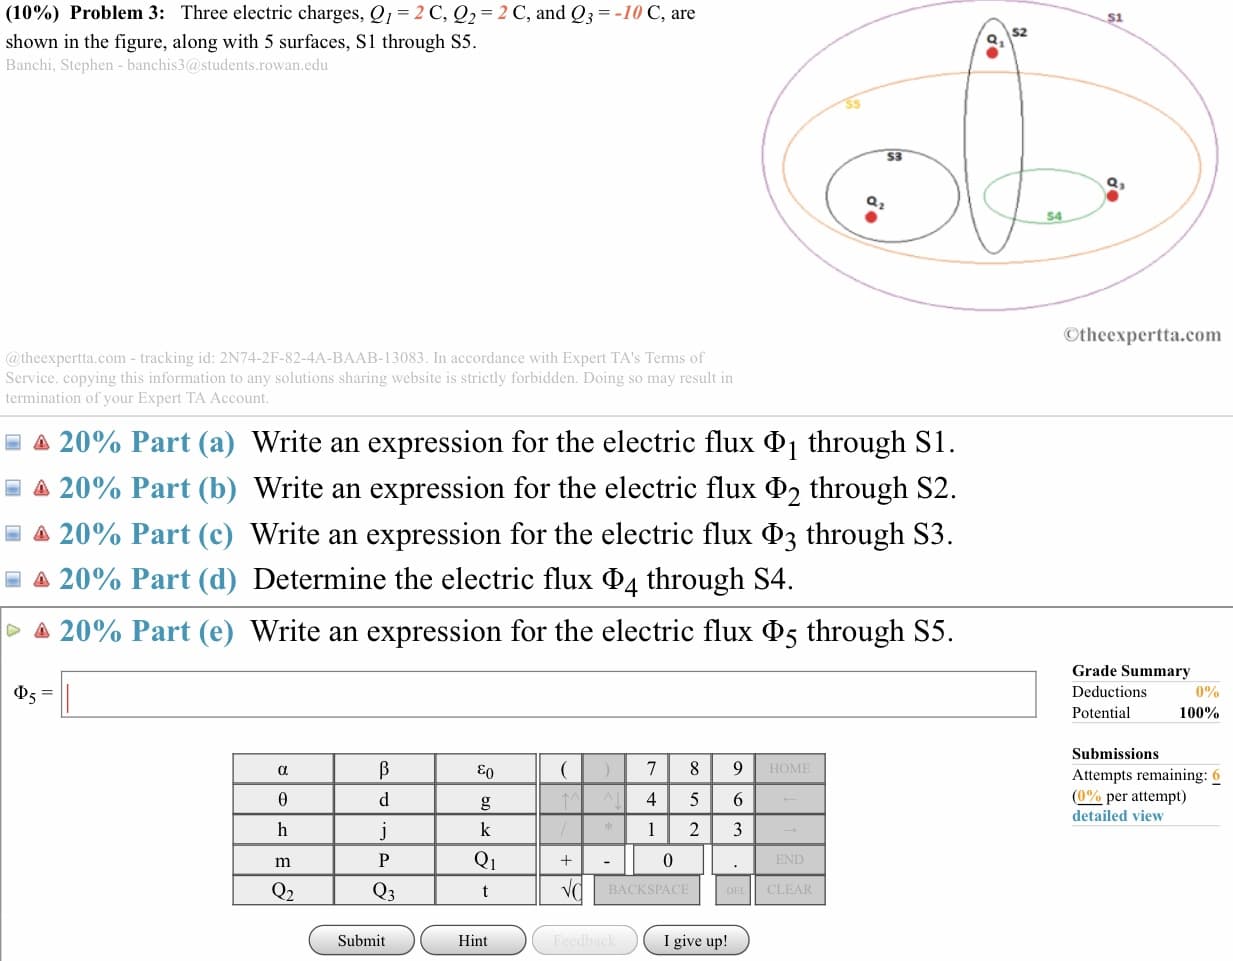 (10%) Problem 3: Three electric charges, Q1-2 C, Q2-2 C, and Q,--10 C, are
shown in the figure, along with 5 surfaces, S1 through S5.
Banchi, Stephen- banchis3@students.rowan.edu
S2
53
Otheexpertta.com
@ theexpertta.com - tracking id: 2N74-2F-82-4A-BAAB-13083. In accordance with Expert TA's Terms of
Service. copying this information to any solutions sharing website is strictly forbidden. Doing so may result in
termination of your Expert TA Account
-là 20% Part (a) Write an expression for the electric flux Φ 1 through SI
Δ 20% Part (b) Write an expression for the electric flux through S2.
20% Part (c) Write an expression for the electric flux ФЗ through S3
20% Part (d) Determine the electric flux Φ4 through S4.
20% Part (e) Write an expression for the electric flux Φ5 through S5
Grade Summary
Deductions
Potential
0%
100%
Submissions
Attempts remaining: 6
(0%0 per attempt)
detailed view
IOMI
4 5 6
Q1
BACKSPACE
CLEAR
Submit
Hint
I give up!
